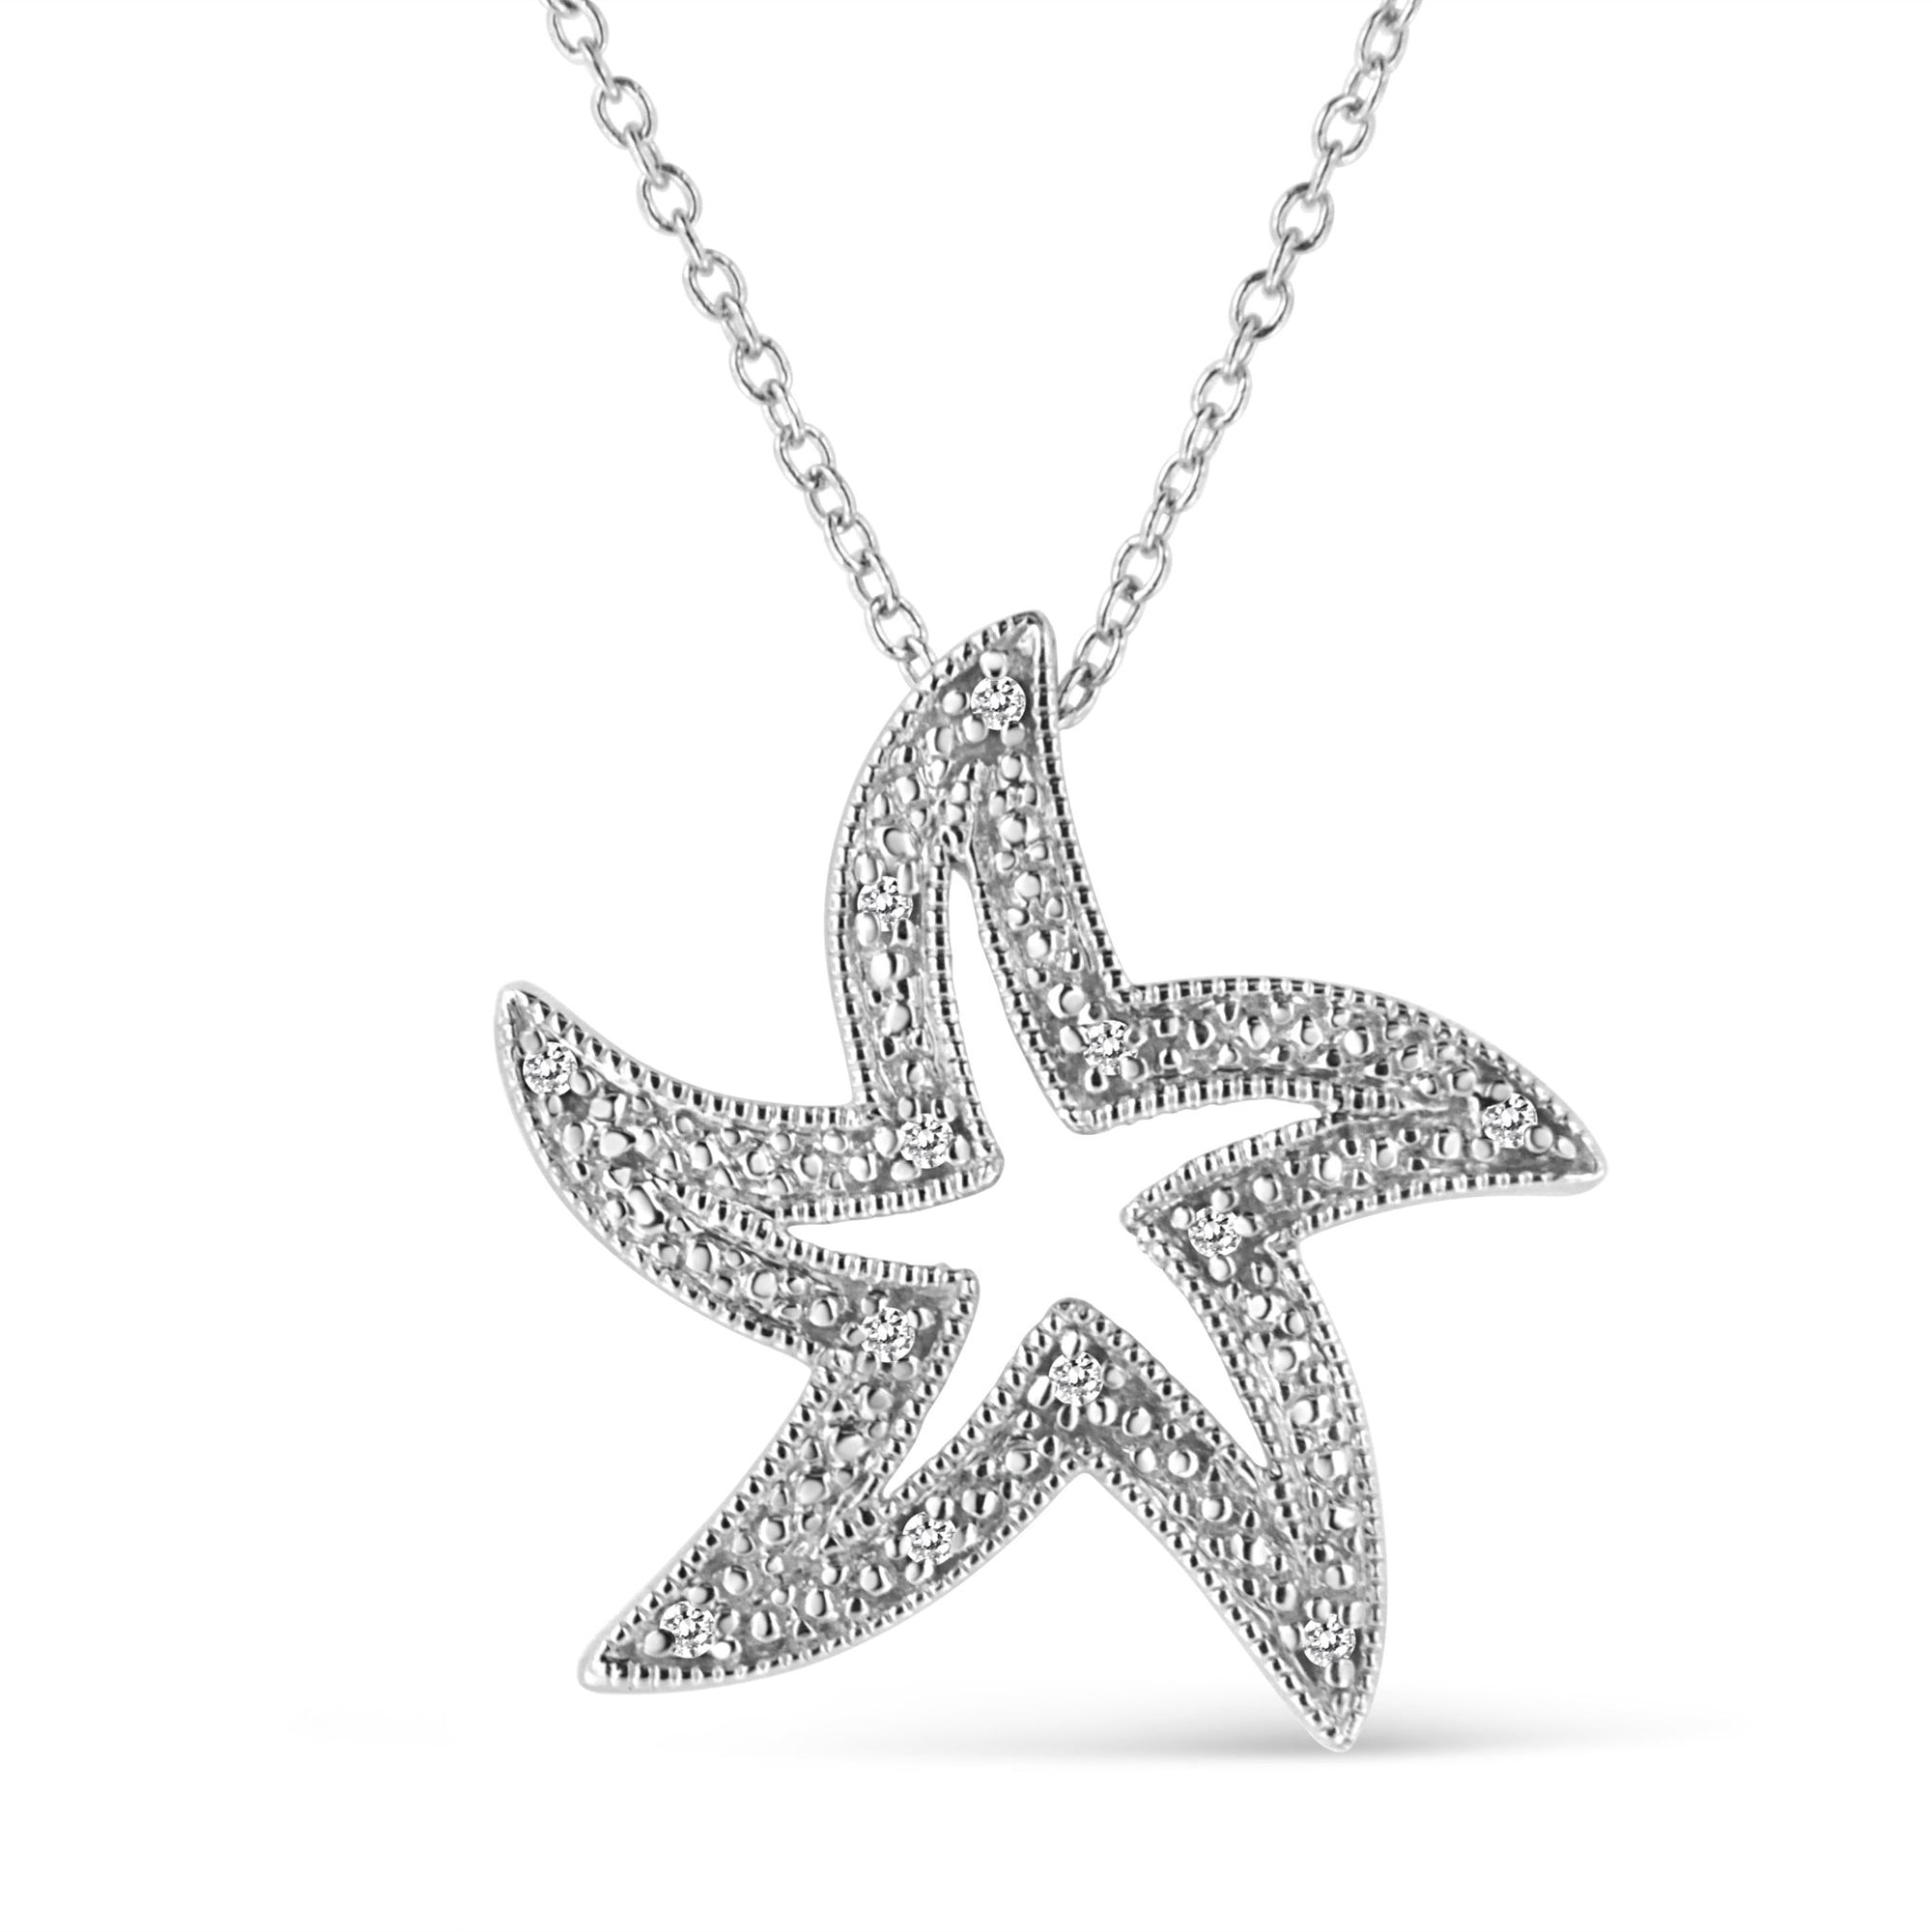 .925 Sterling Silver Prong-Set Diamond Accent Starfish 18" Pendant Necklace (I-J Color, I1-I2 Clarity) - LinkagejewelrydesignLinkagejewelrydesign